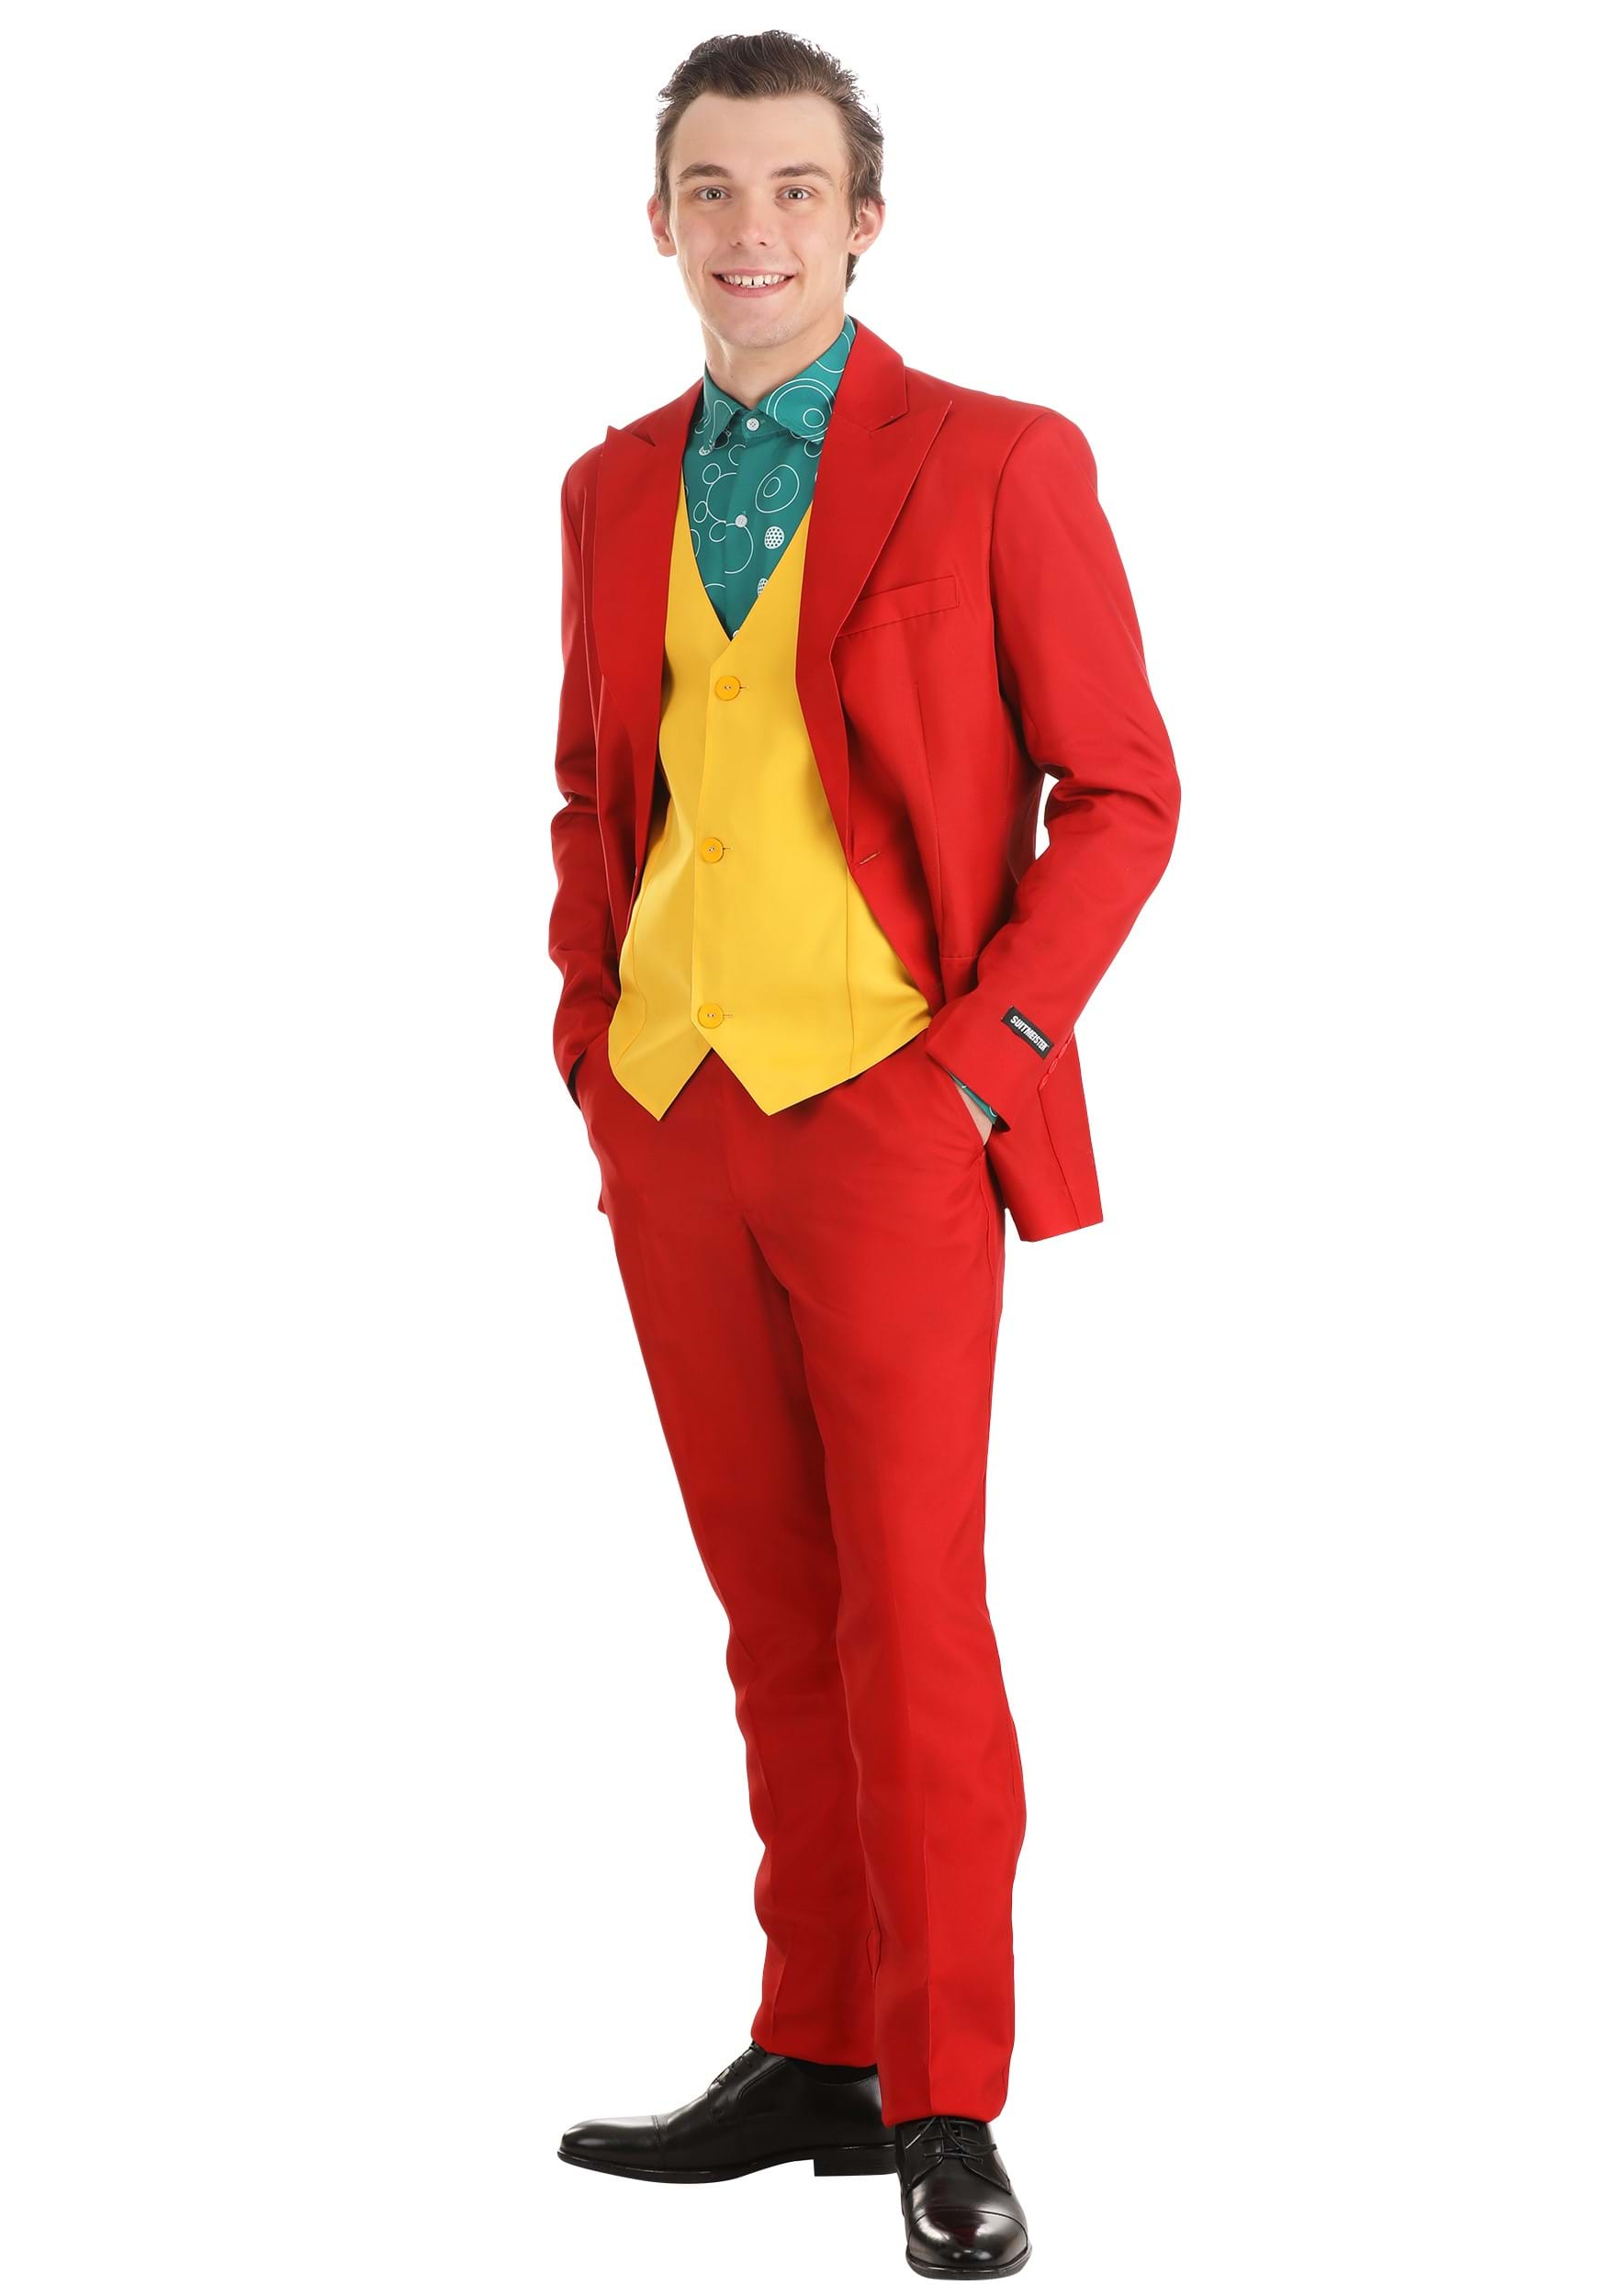 Image of Dark Clown Comedian Suit Costume ID OSCSMS-1039-L